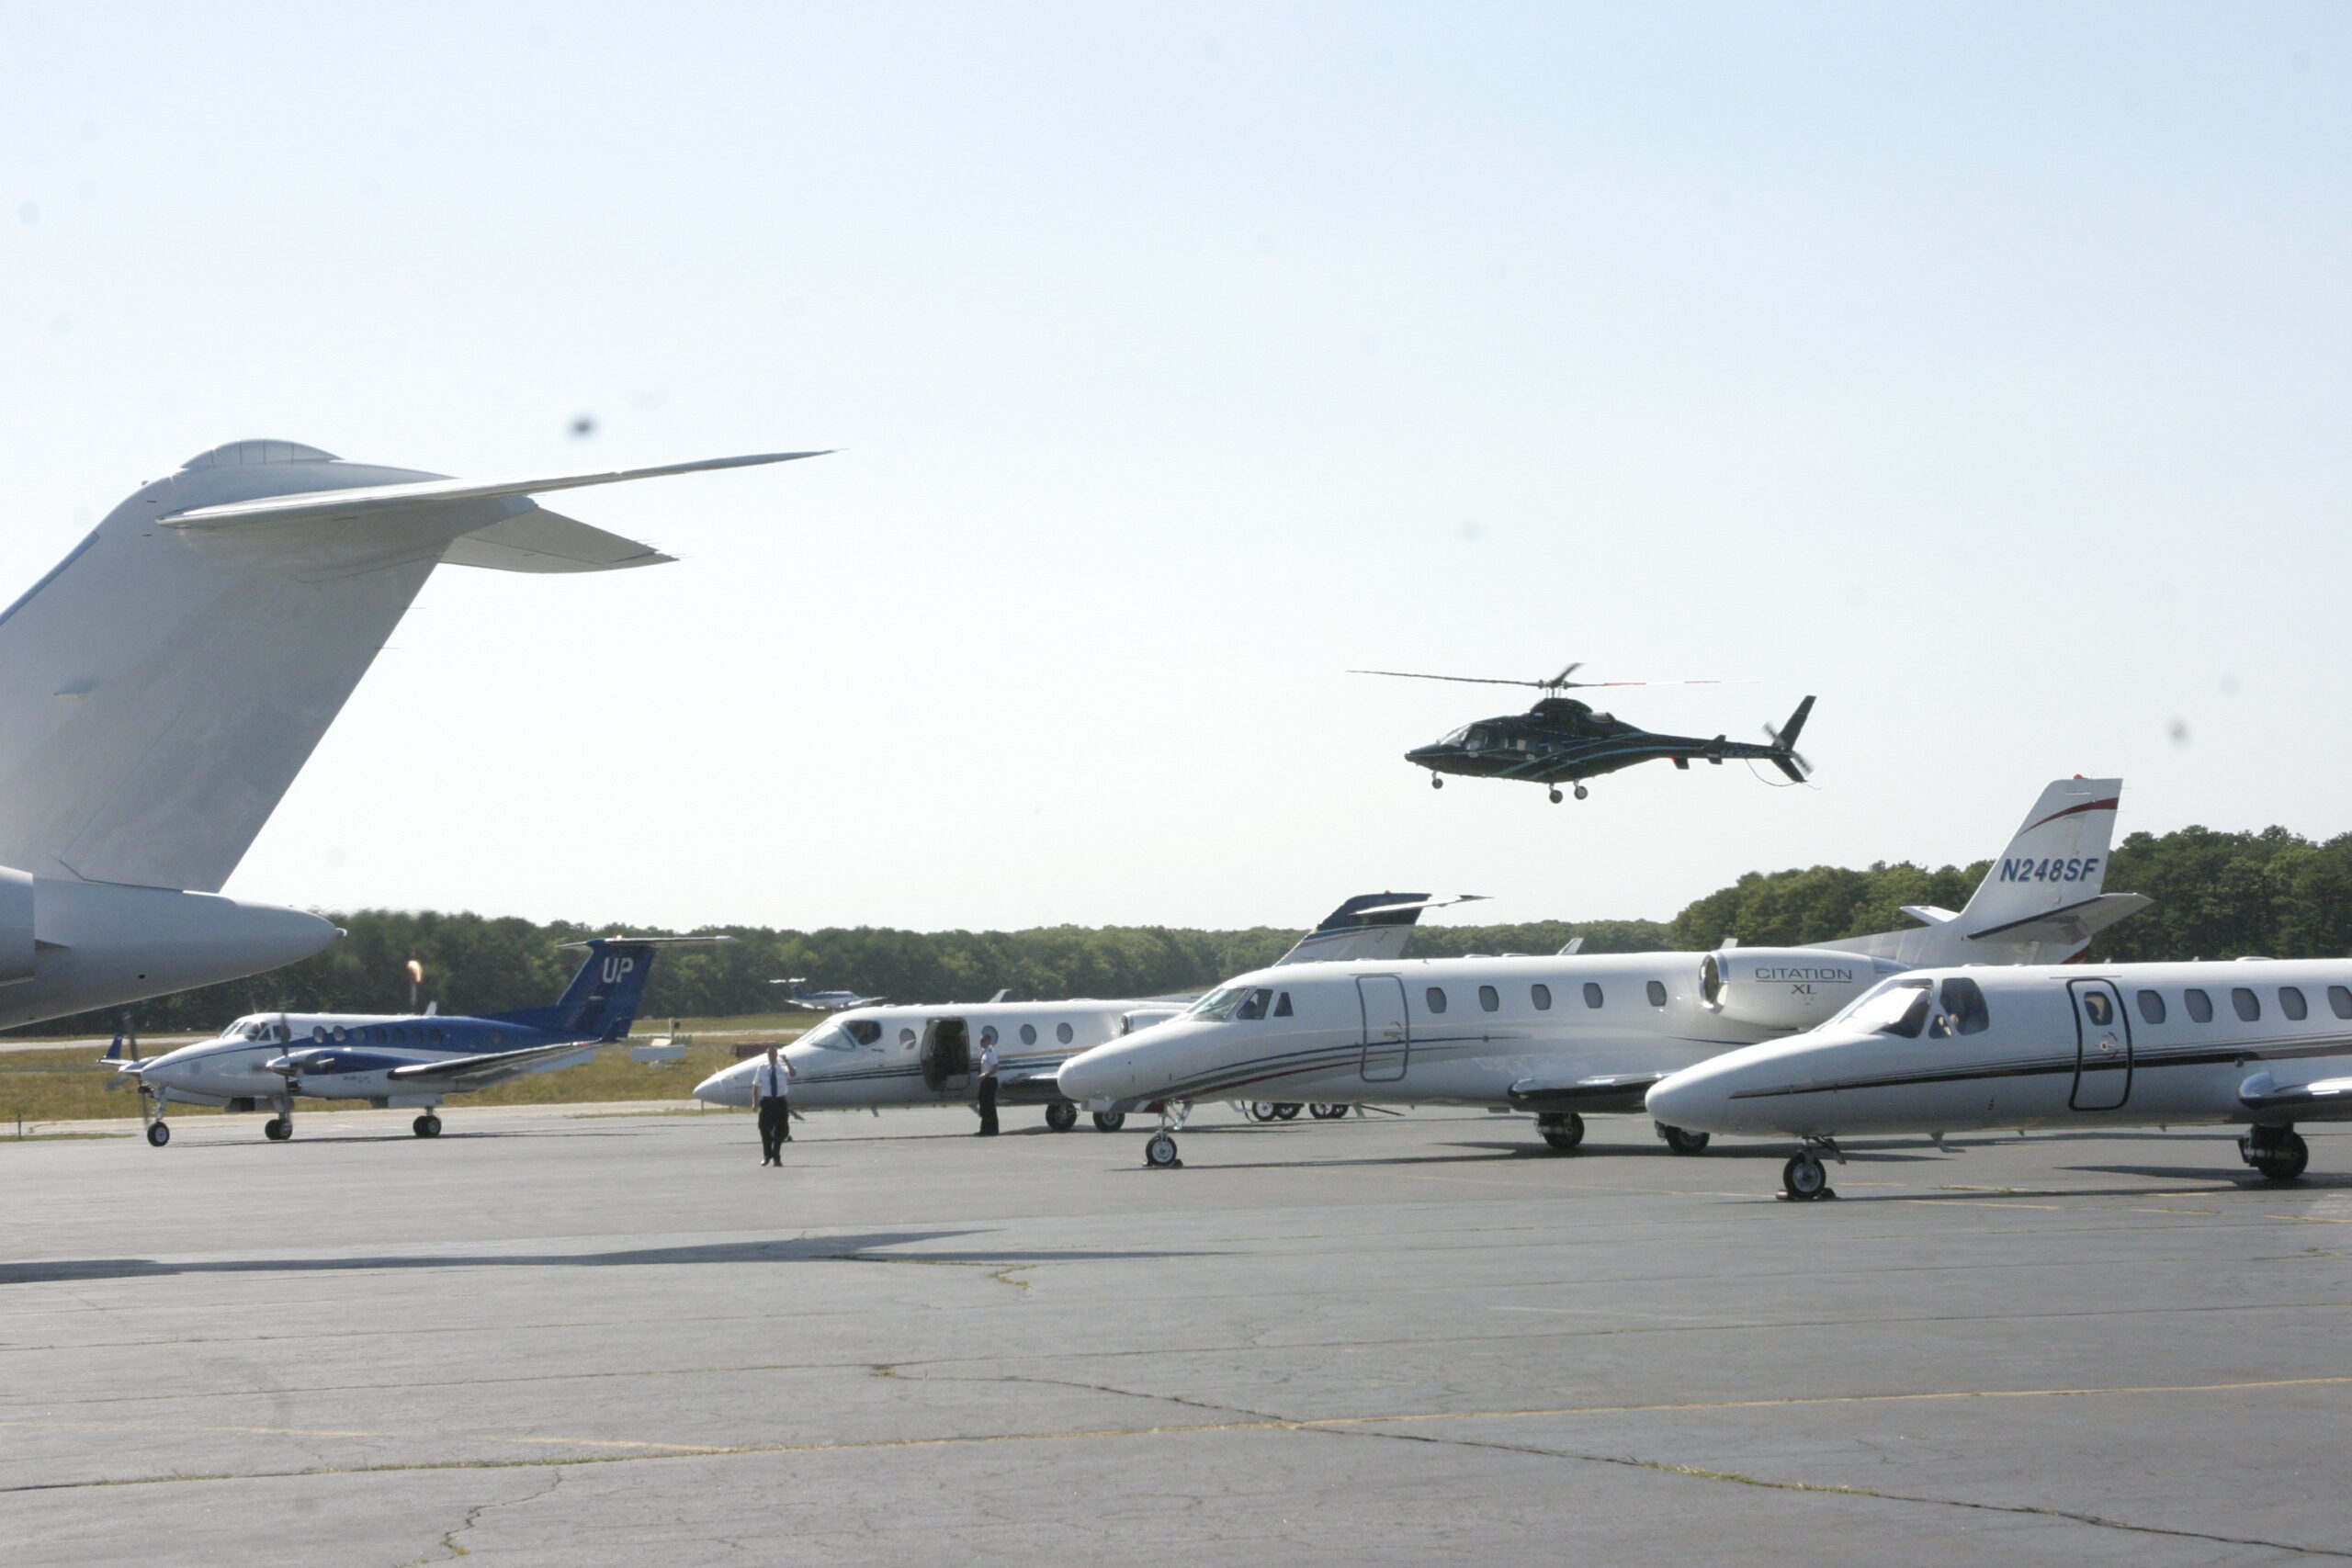 The National Business Aviation Association has withdrawn a federal lawsuit against East Hampton Town, saying that a recent state court ruling addressed the group's desire to block restrictions on aircraft.